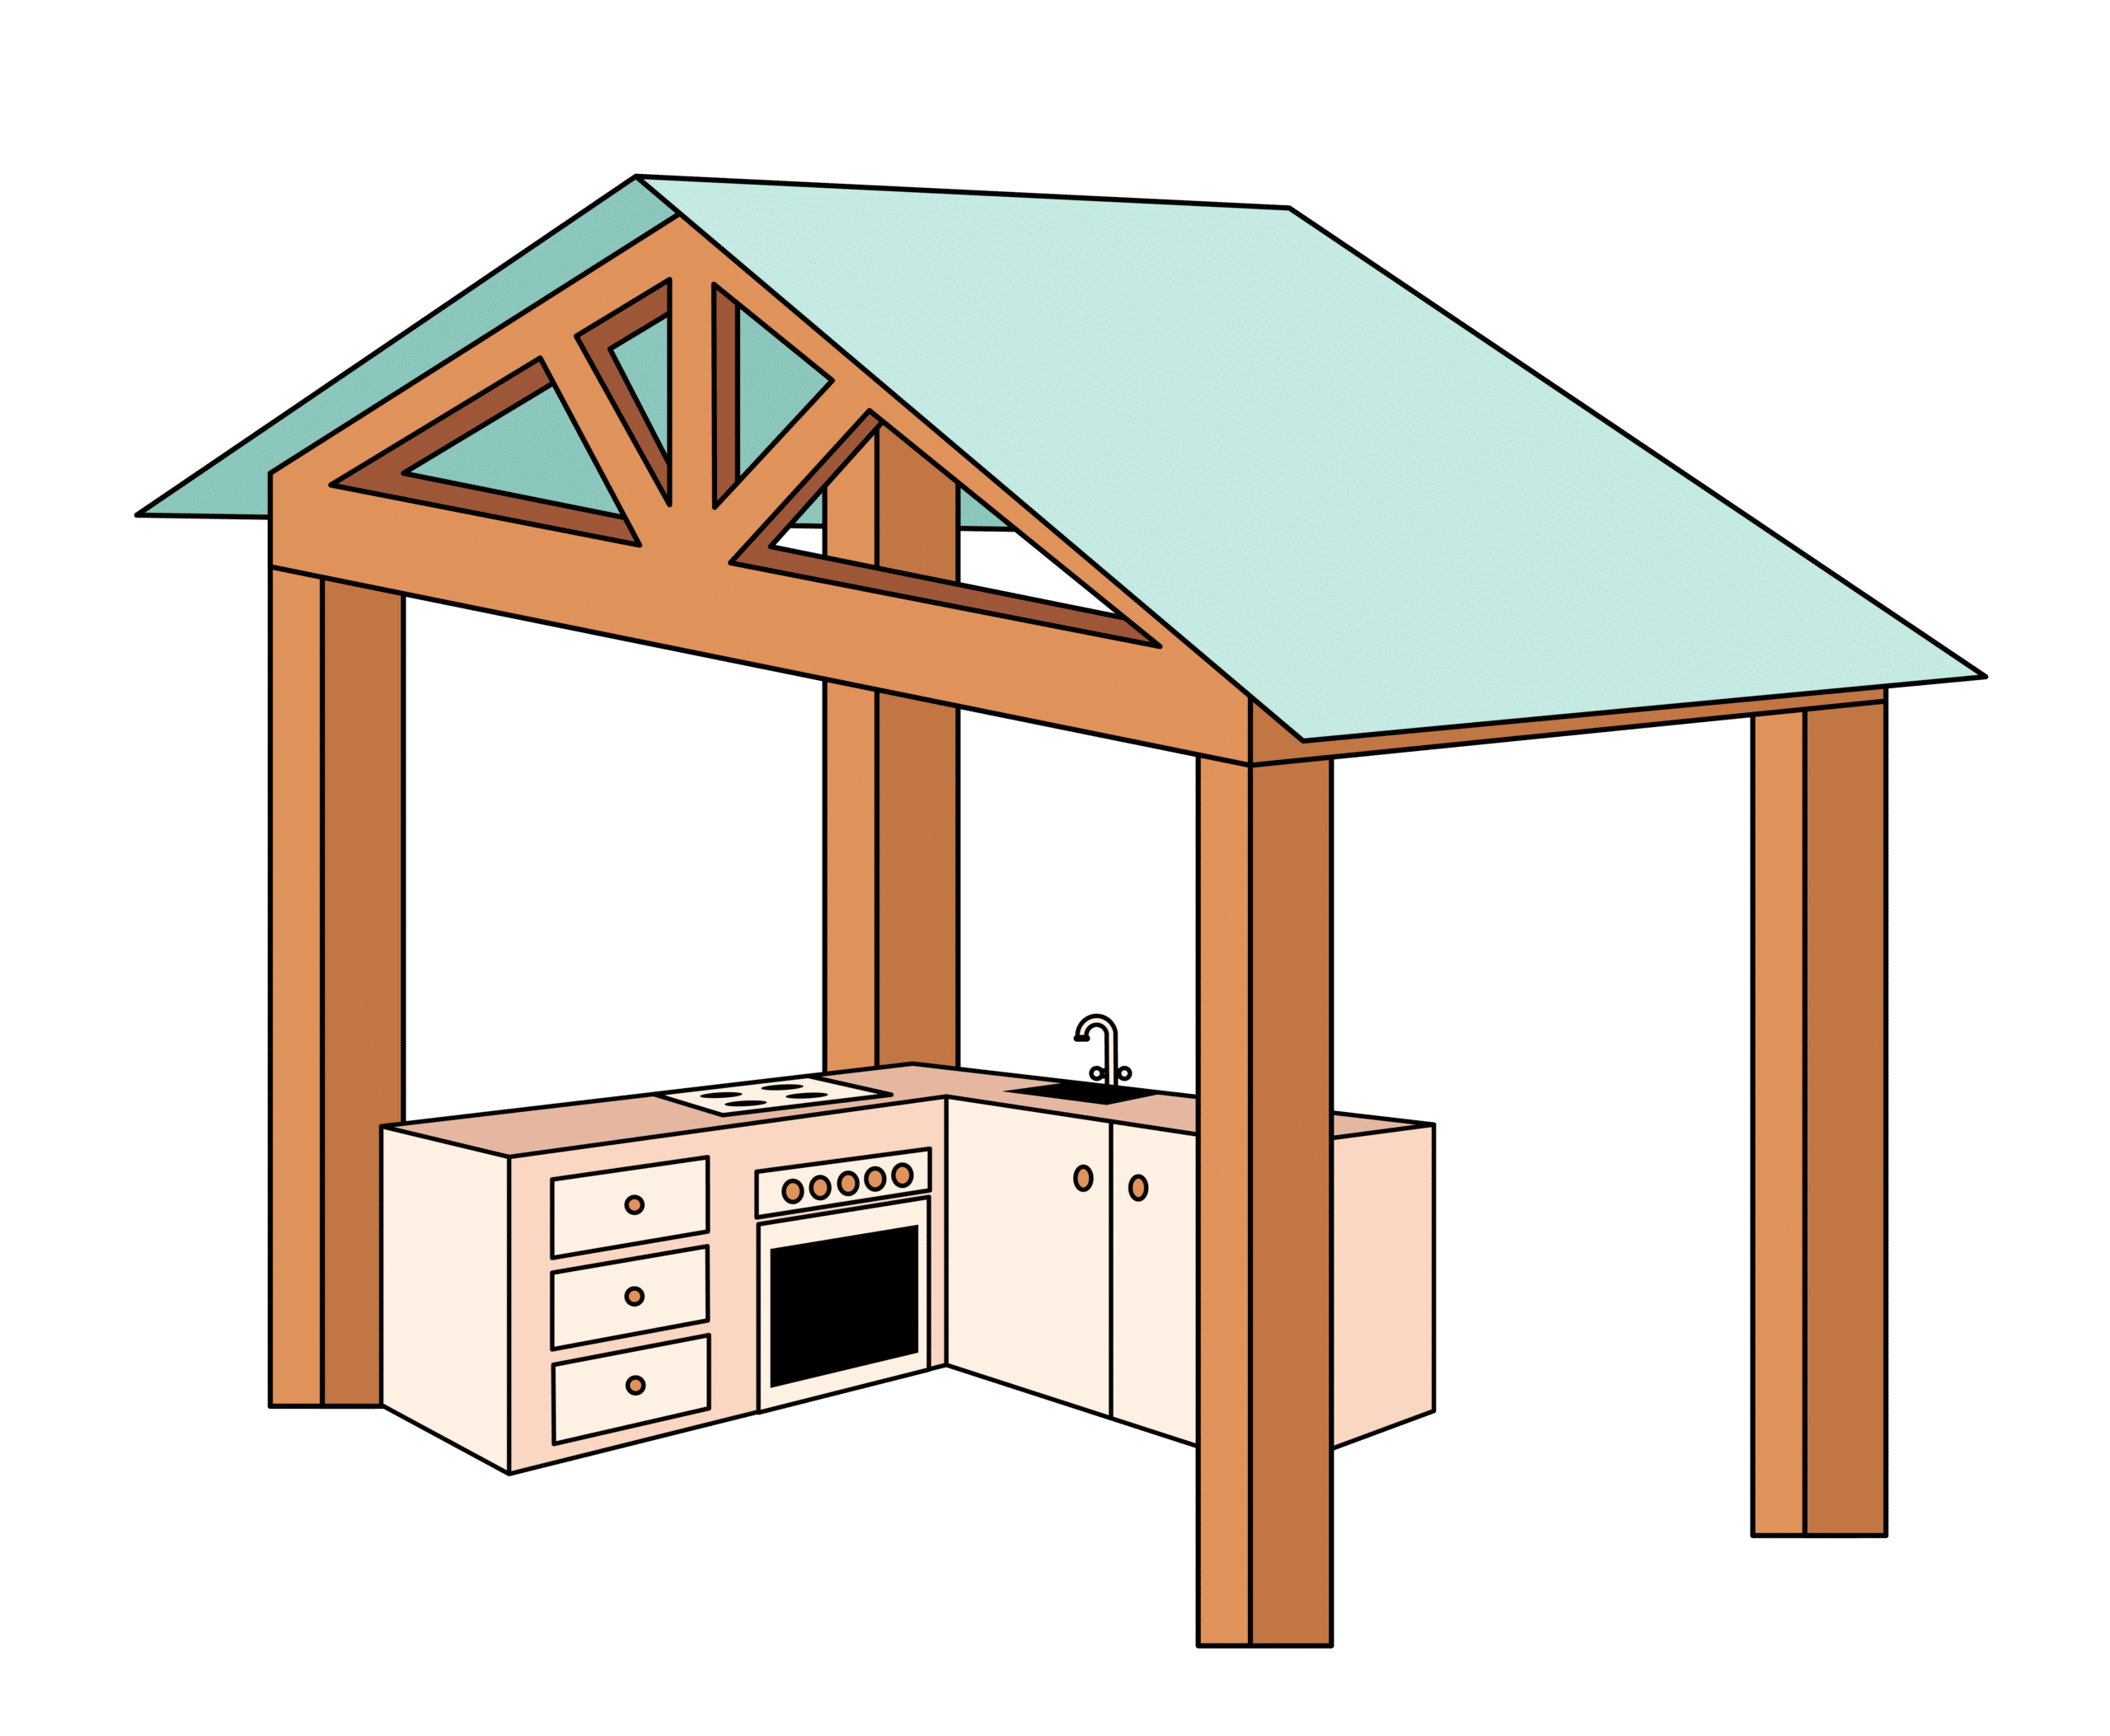 Truss roof for outdoor kitchen